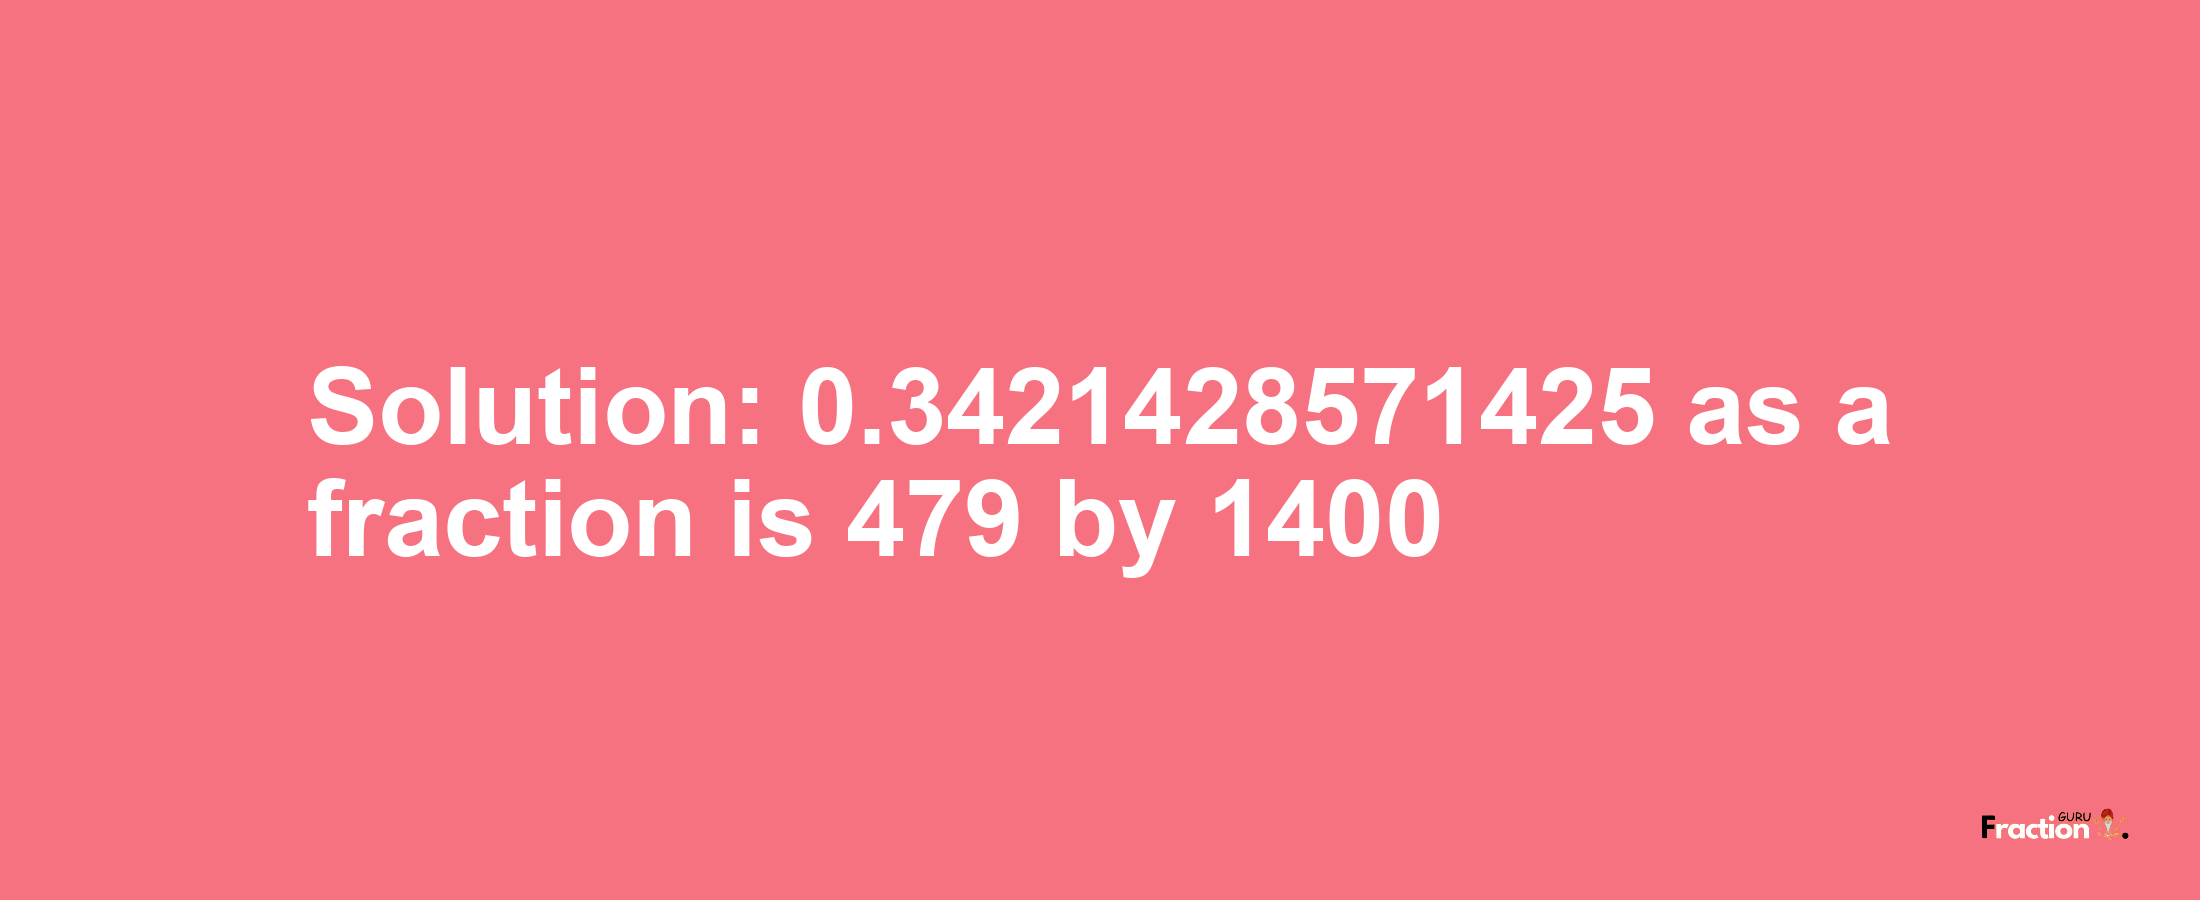 Solution:0.3421428571425 as a fraction is 479/1400